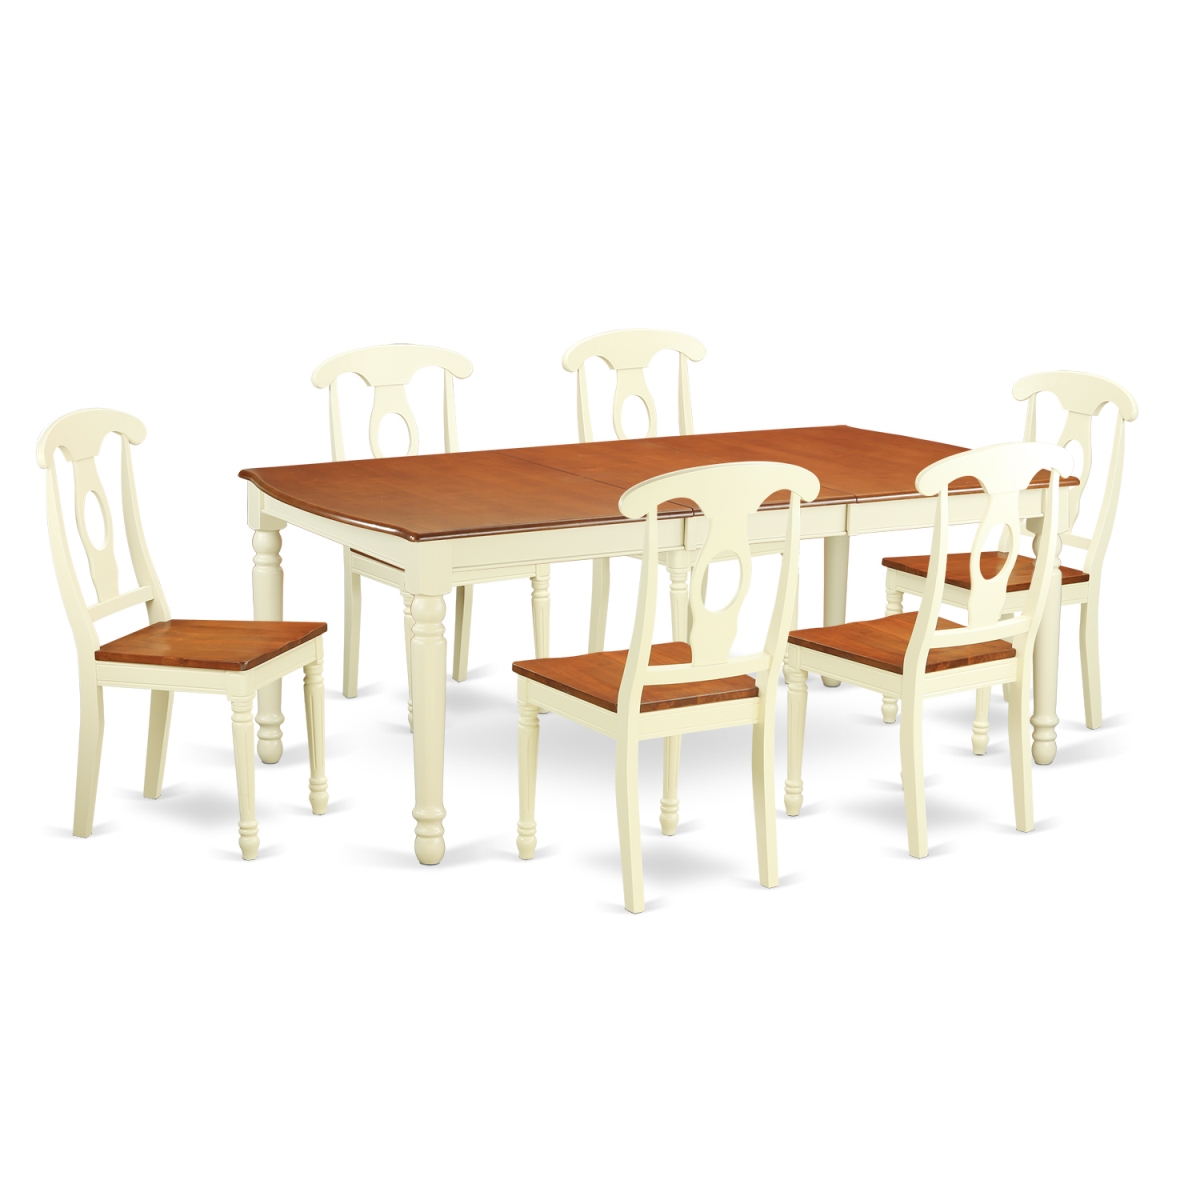 Doke7-whi-w Dinette Set With 6 Table & 6 Chairs, Buttermilk & Cherry - 7 Piece